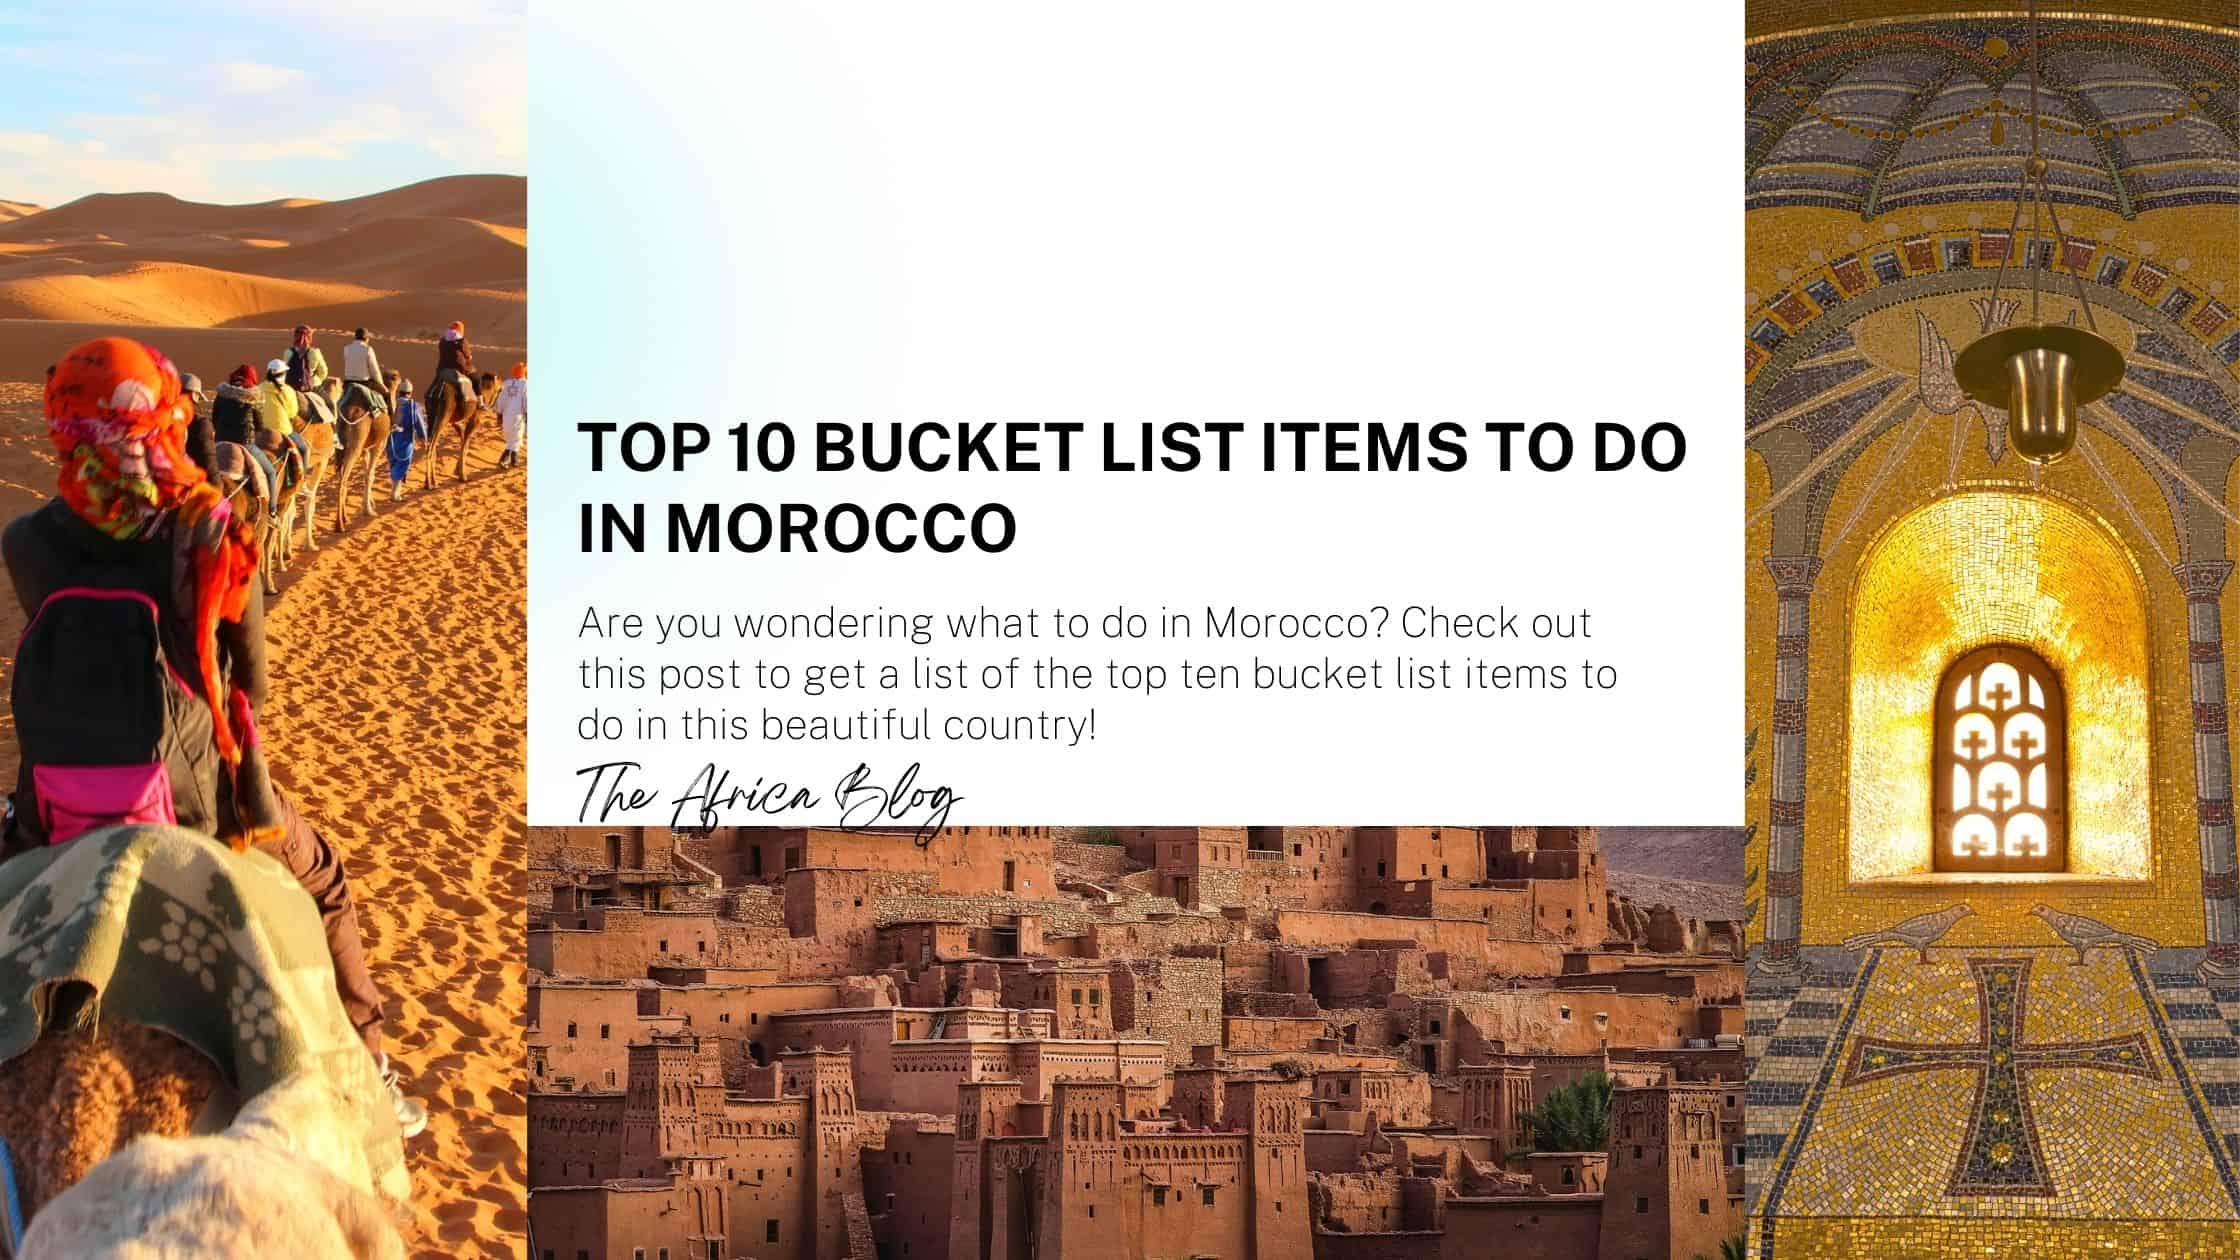 Top 10 bucket list items to do in Morocco